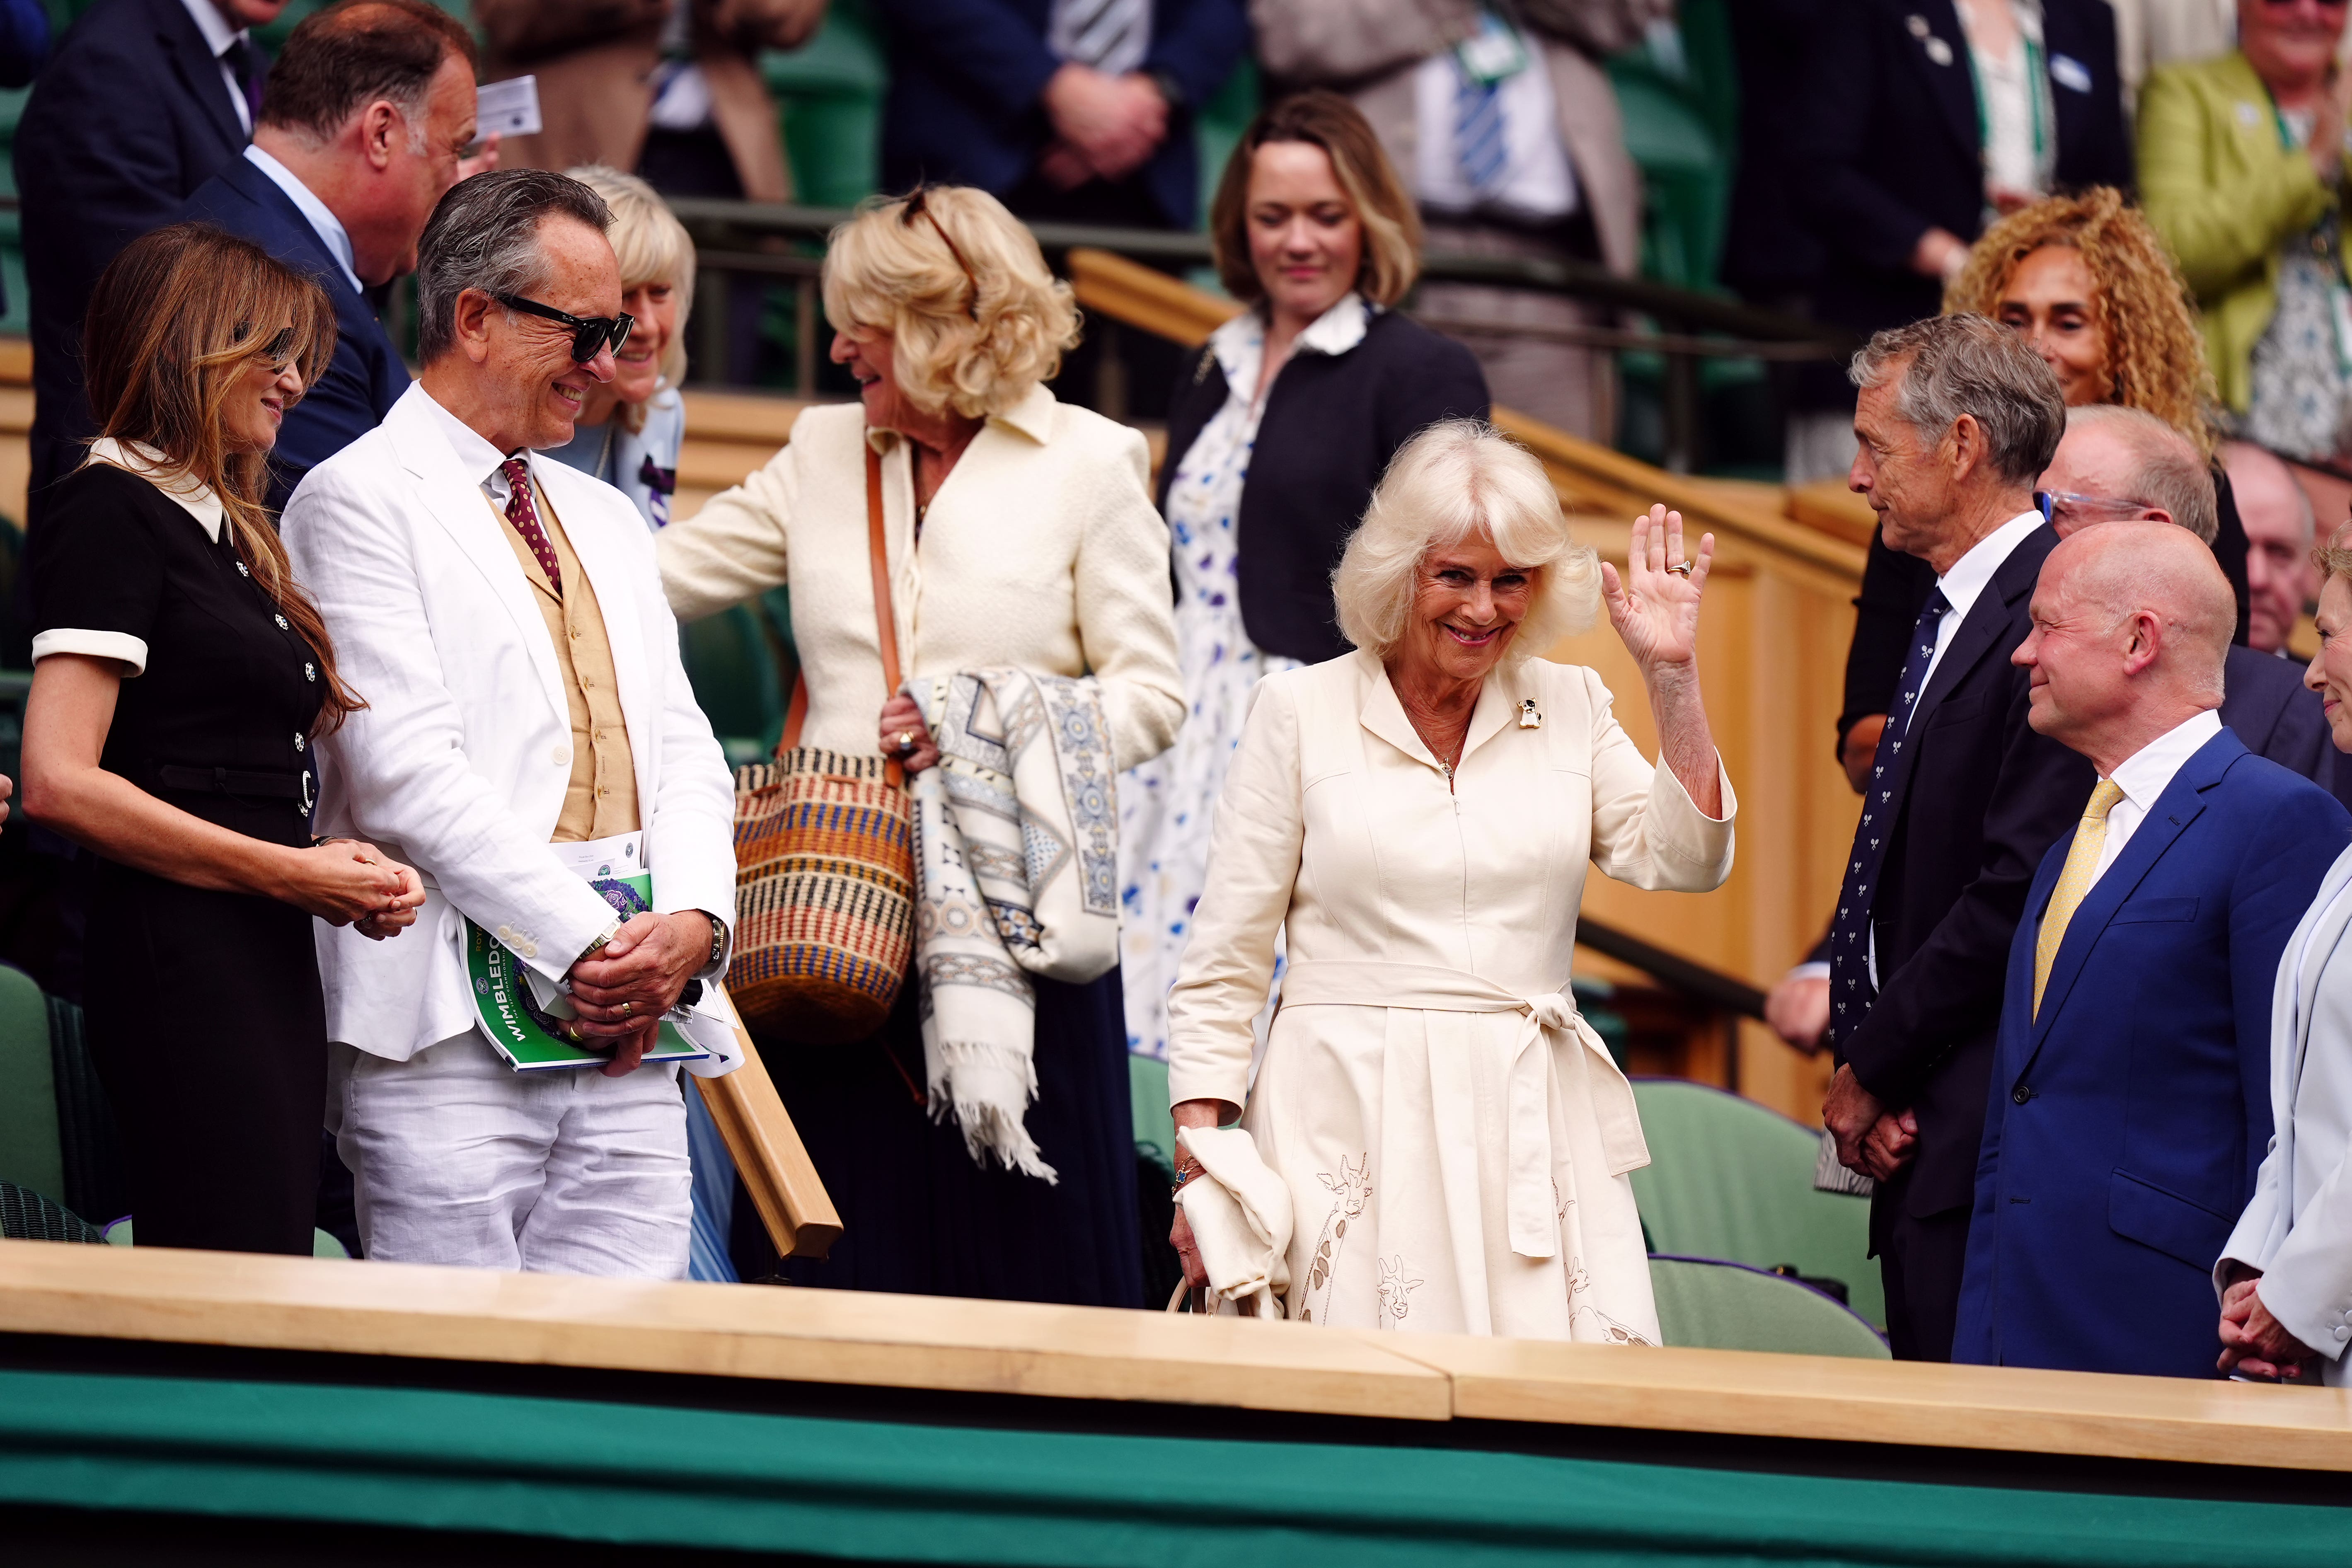 The Queen in the royal box joined by her sister Annabel Elliot and watched by Jemima Khan, Richard E Grant and Lord Hague (Mike Egerton/PA)